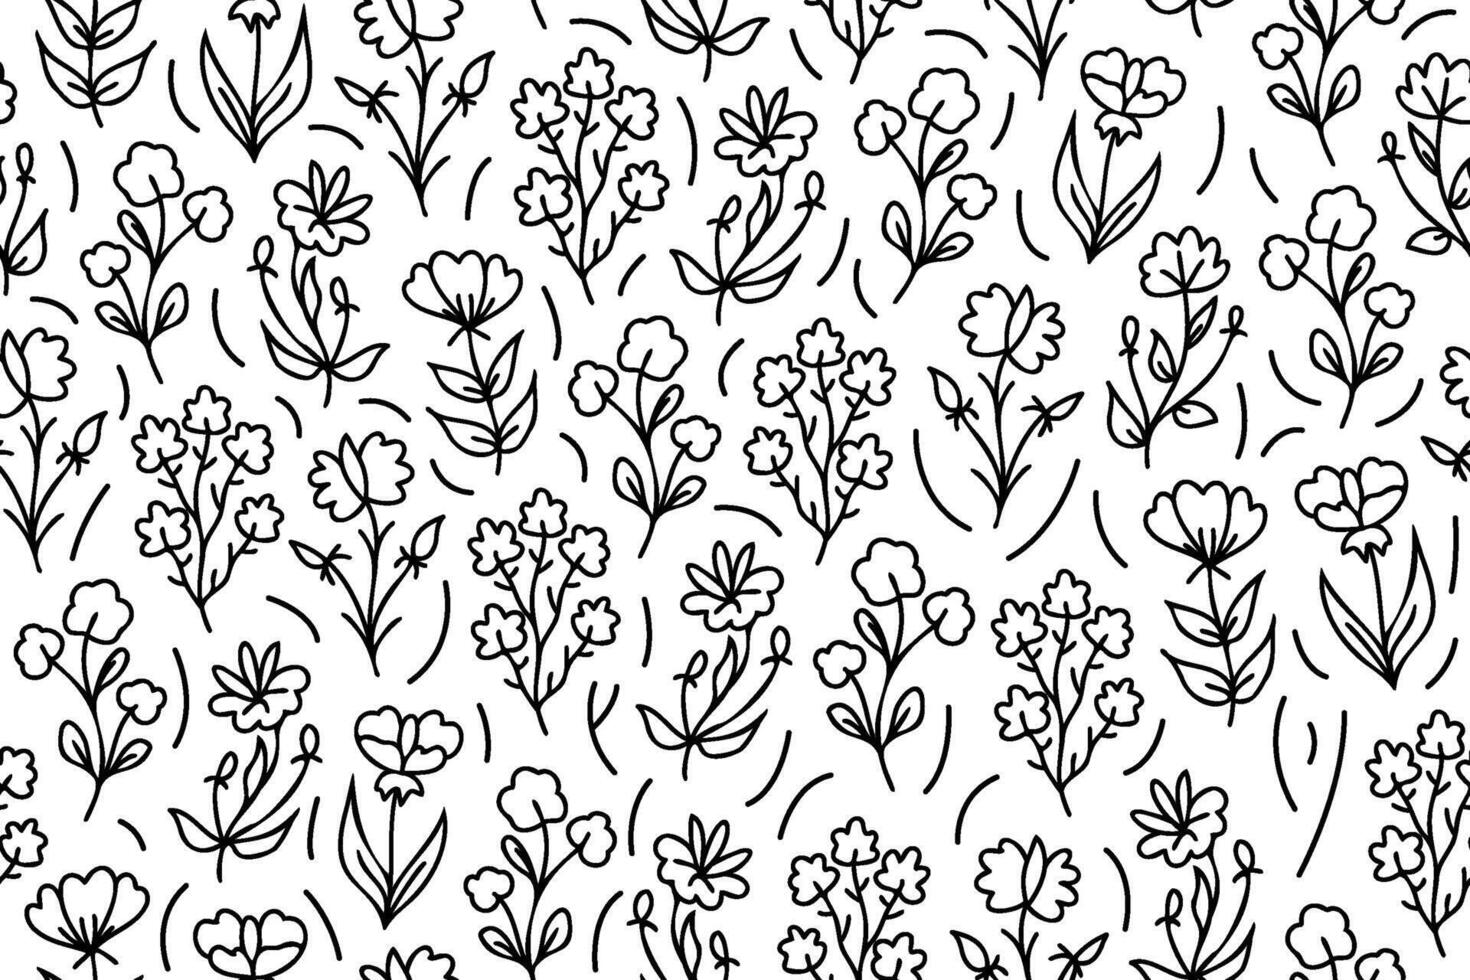 Outline seamless floral pattern with hand drawn flowers. Line art seamless black and white floral pattern. Endless repeating minimalistic abstract design. vector